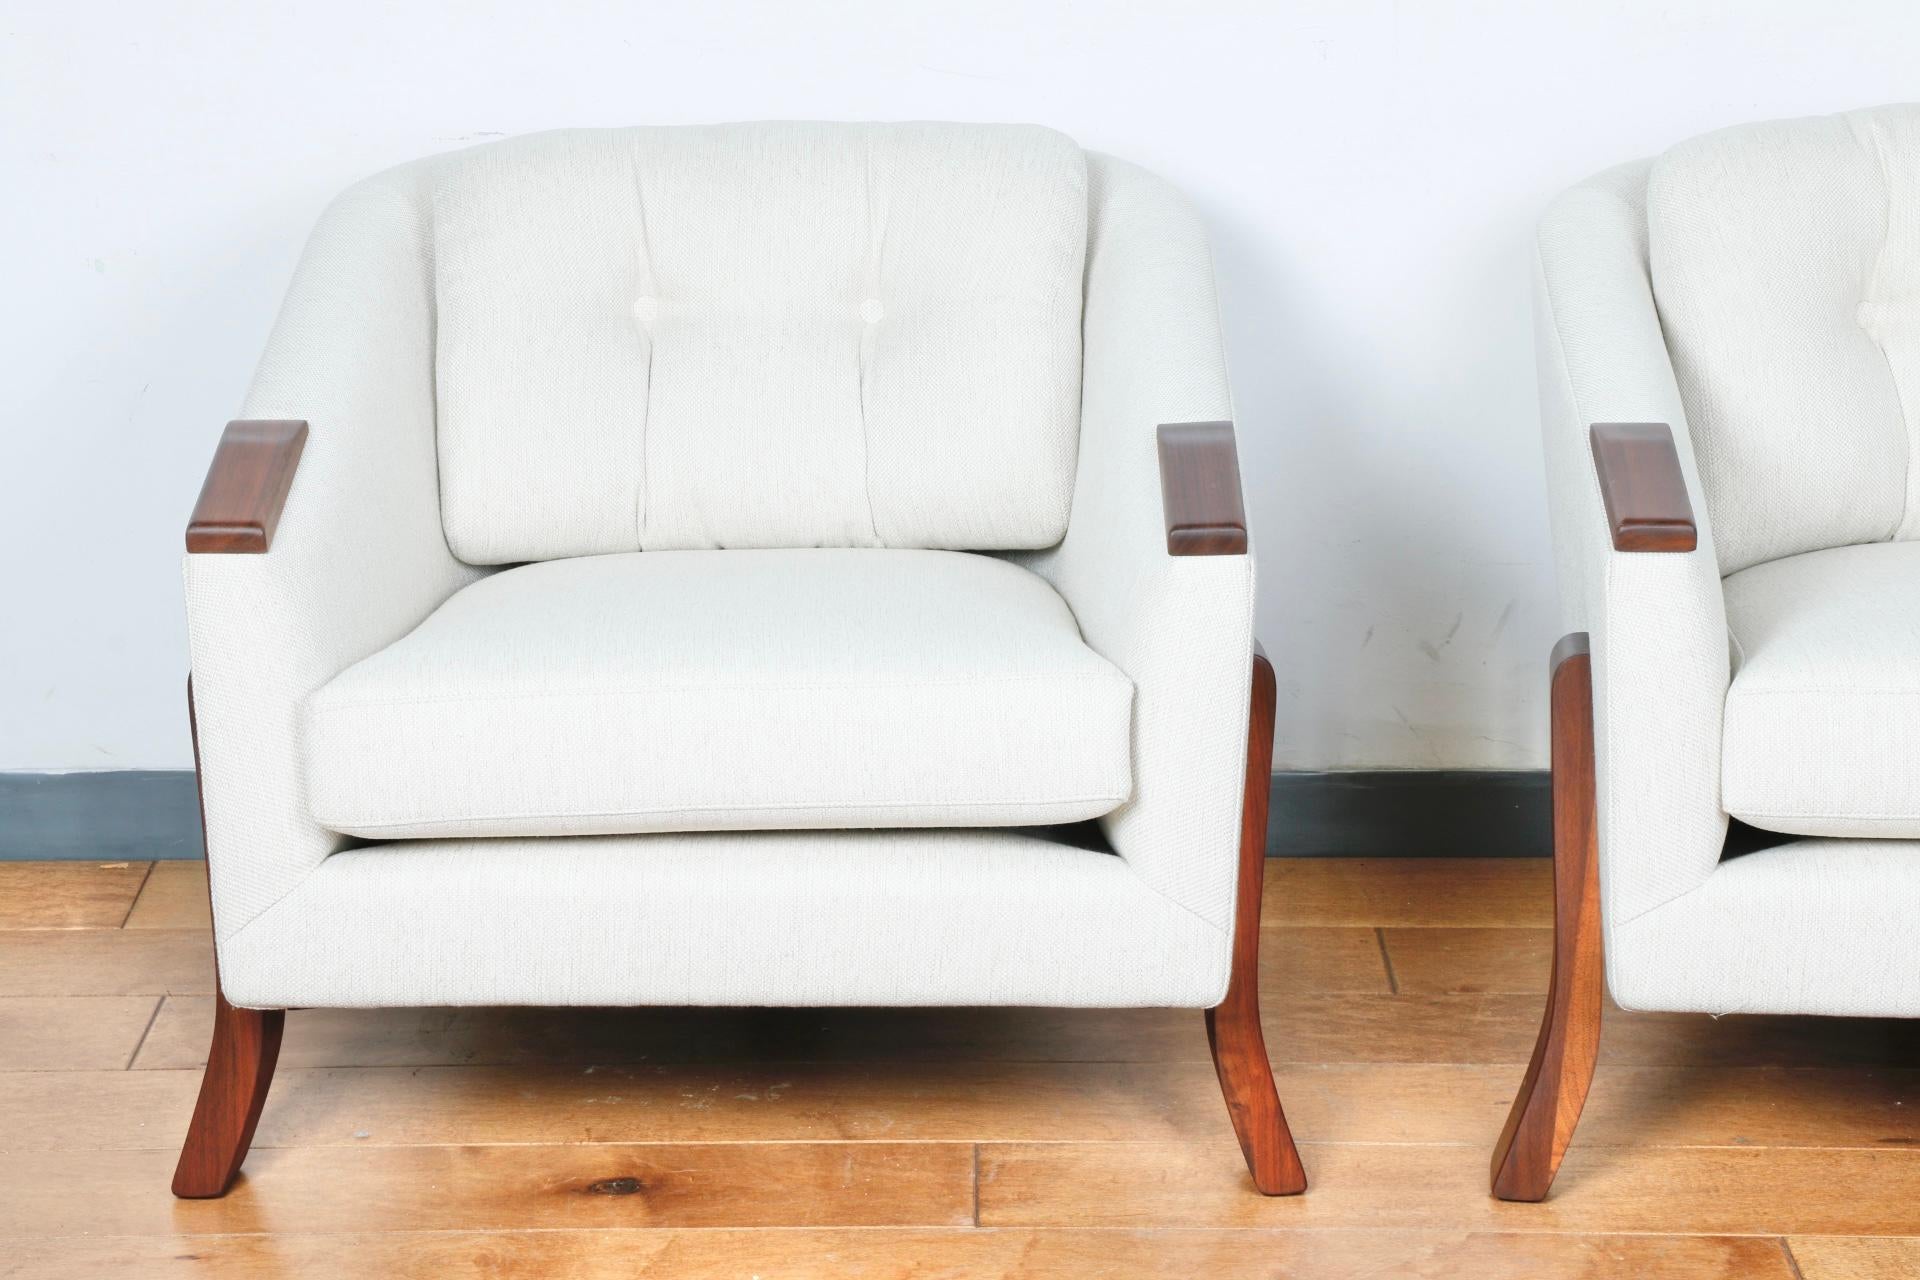 Beautiful reupholstered and refinished pair of lounge chairs. Great vintage style fabric in excellent condition. They have beautiful bases that make them stand out. 
Super comfortable and chill. 

